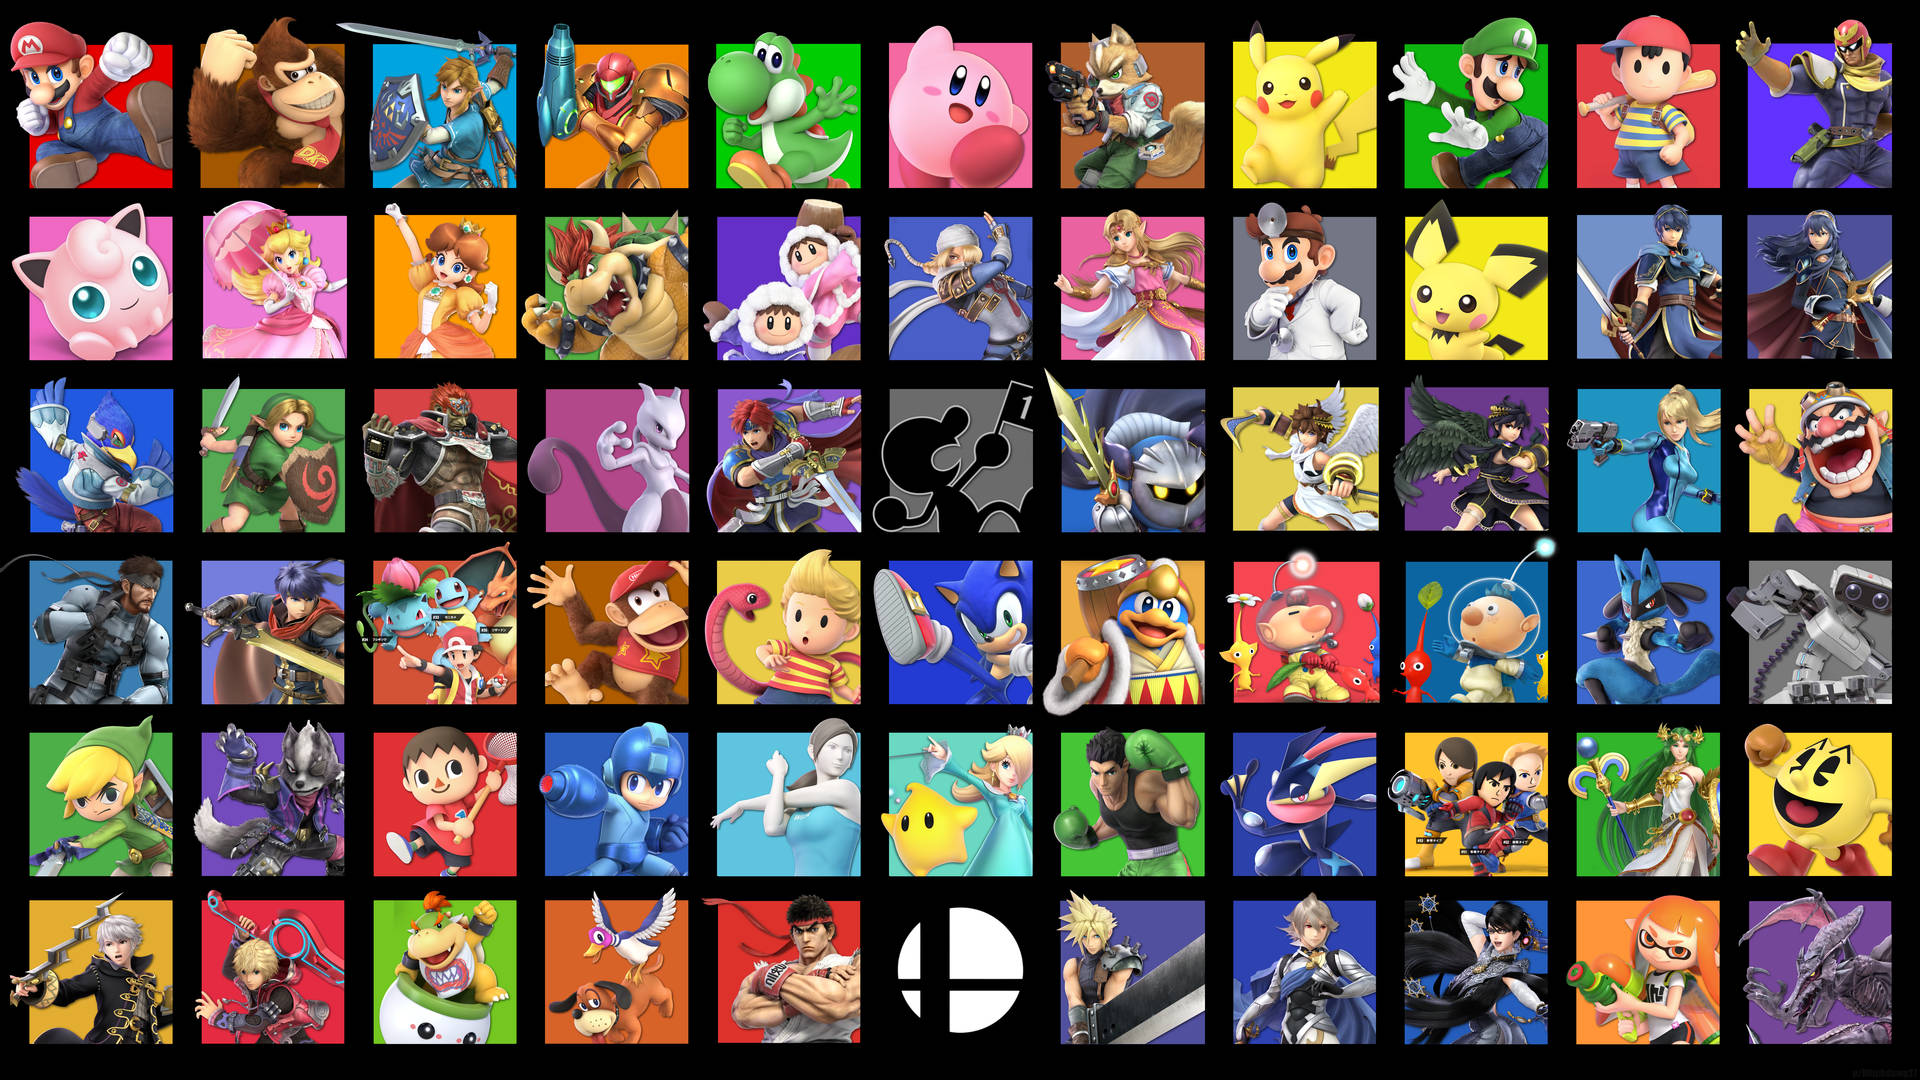 Characters from Super Smash Bros Ultimate are ready to brawl! Wallpaper